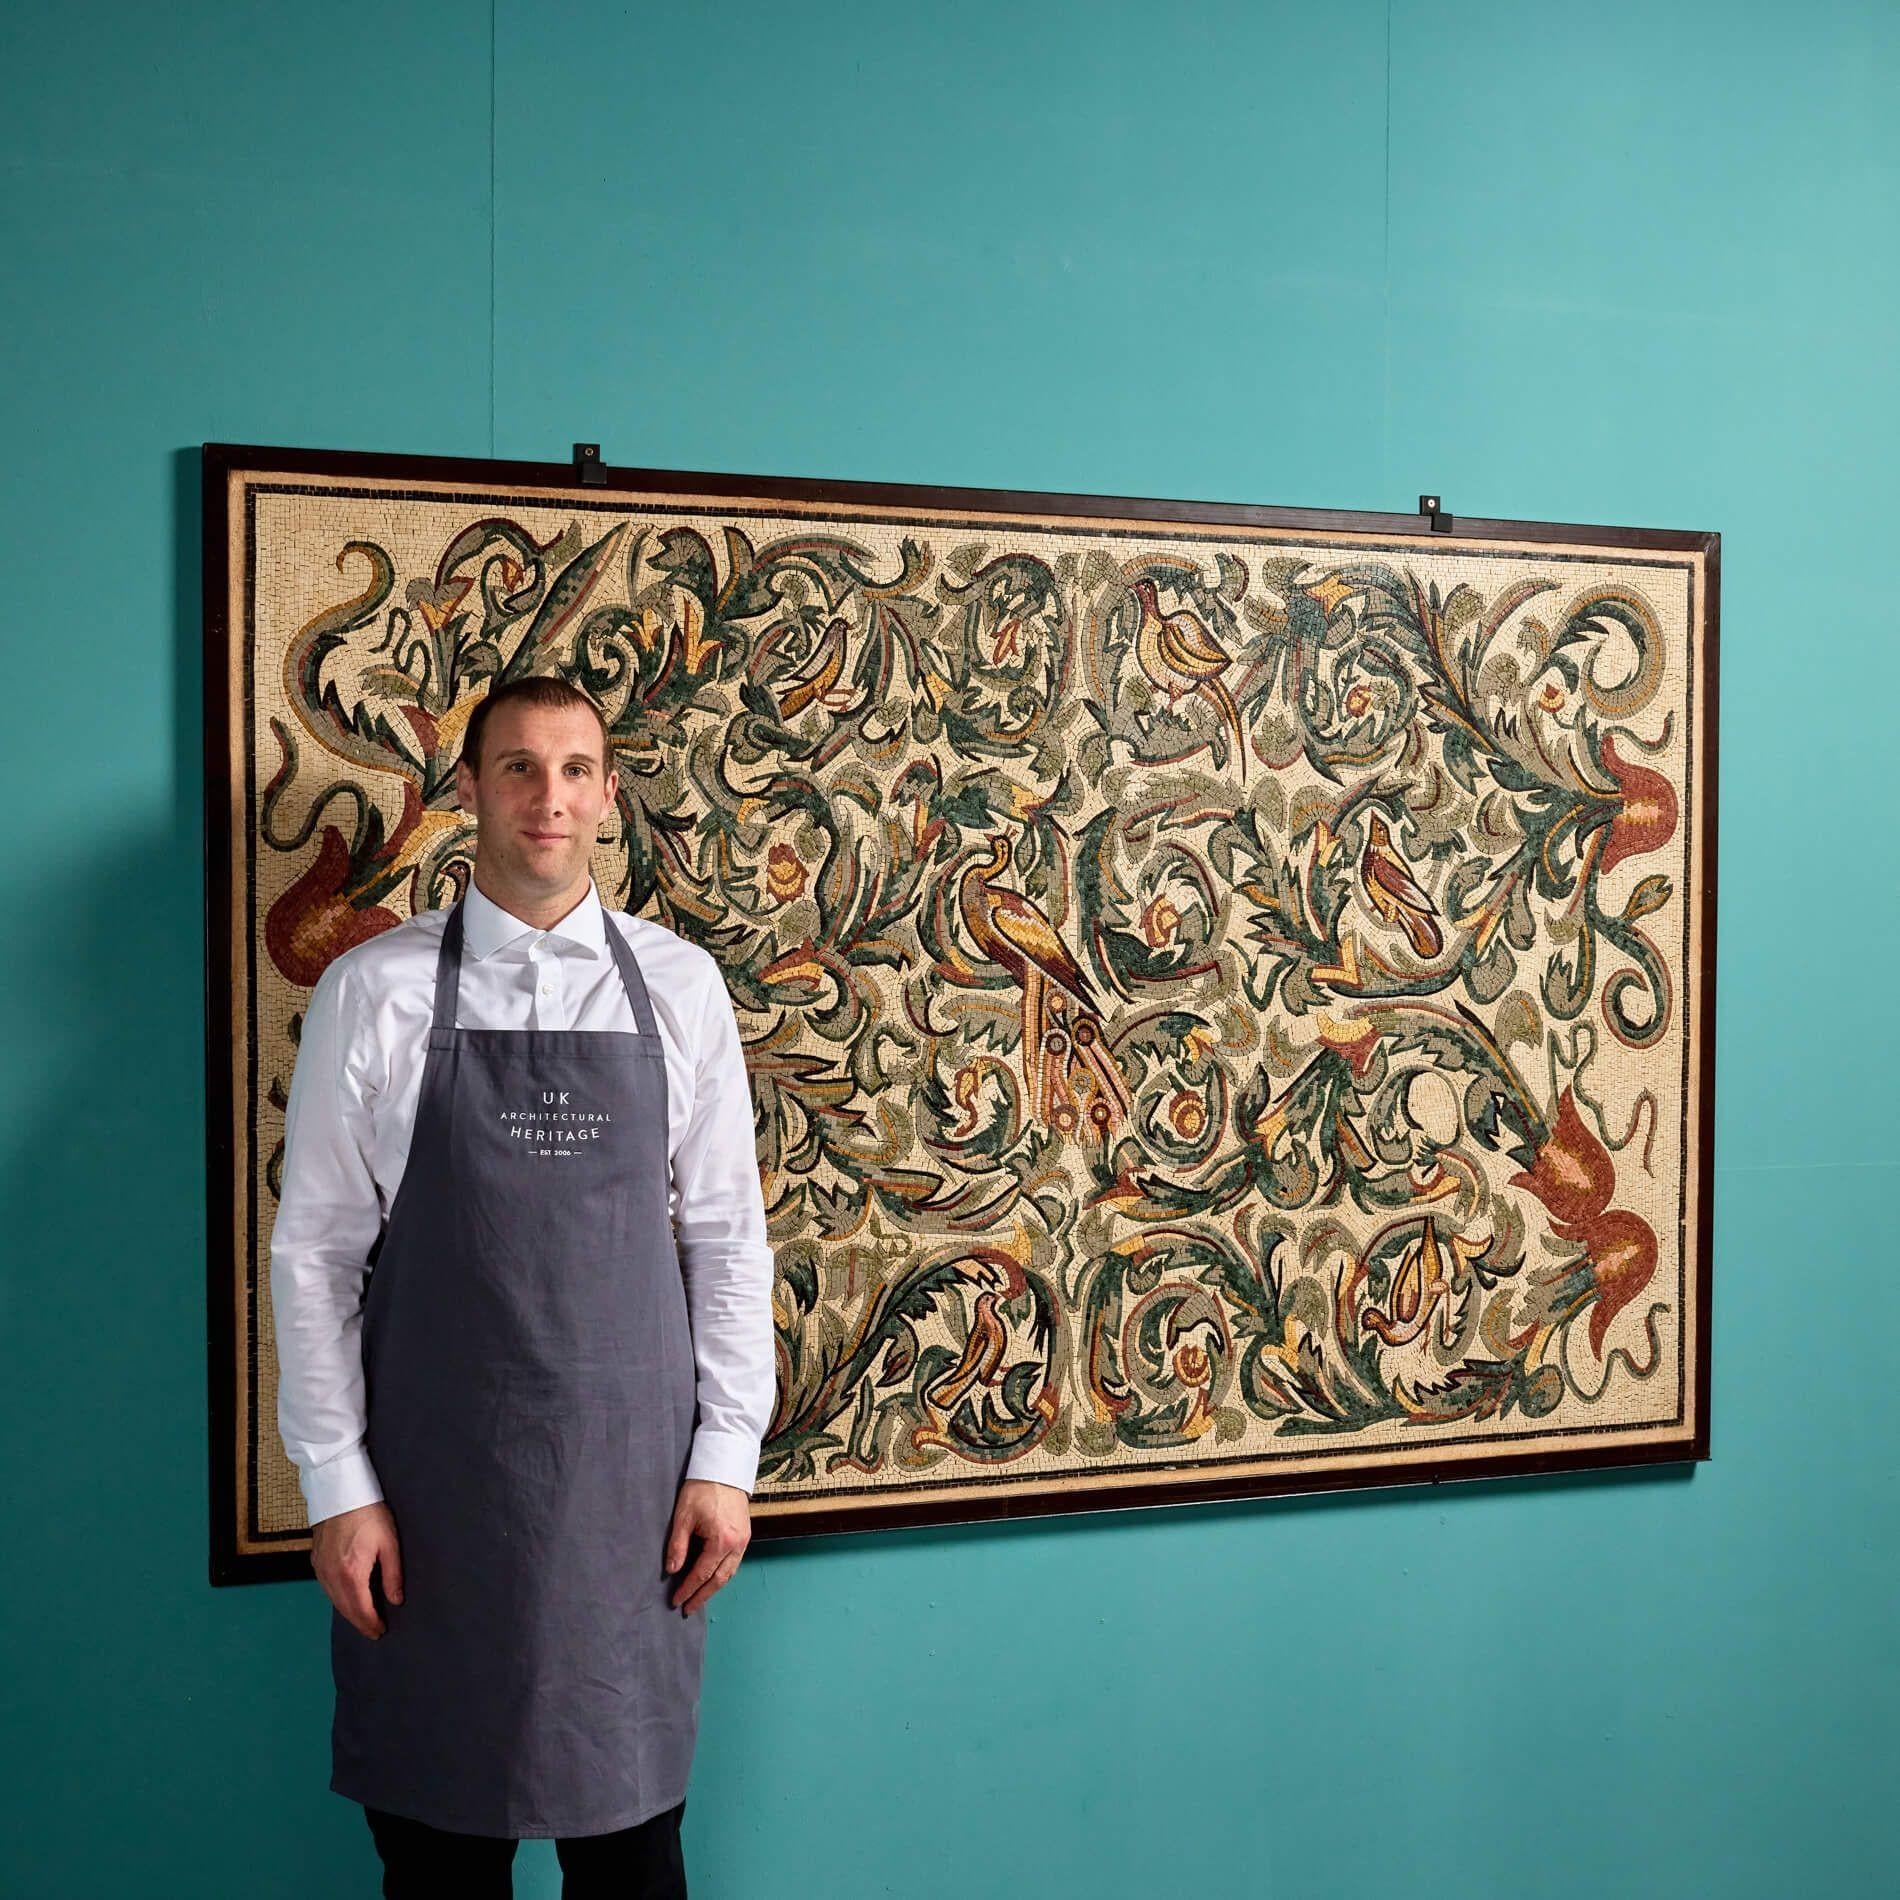 The large scale and size of this intricate mosaic wall panel is an impressive artwork piece for any interior. It is beautifully made in Roman style, small tessera mosaic tiles used to depict intricate birds among scrolling green acanthus leaves and